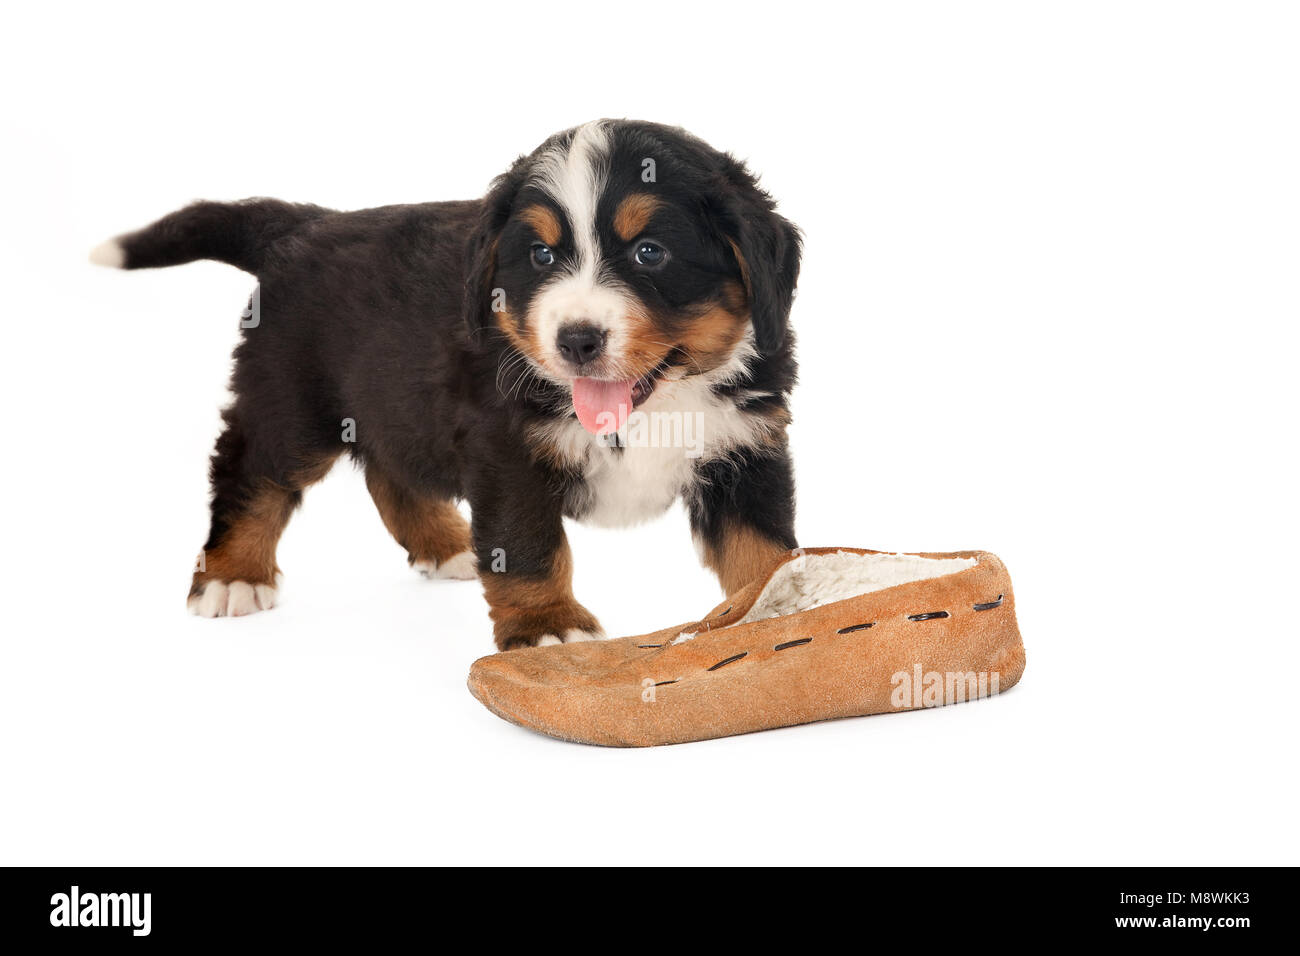 Bernese mountain dog puppy playing with a slipper Stock Photo